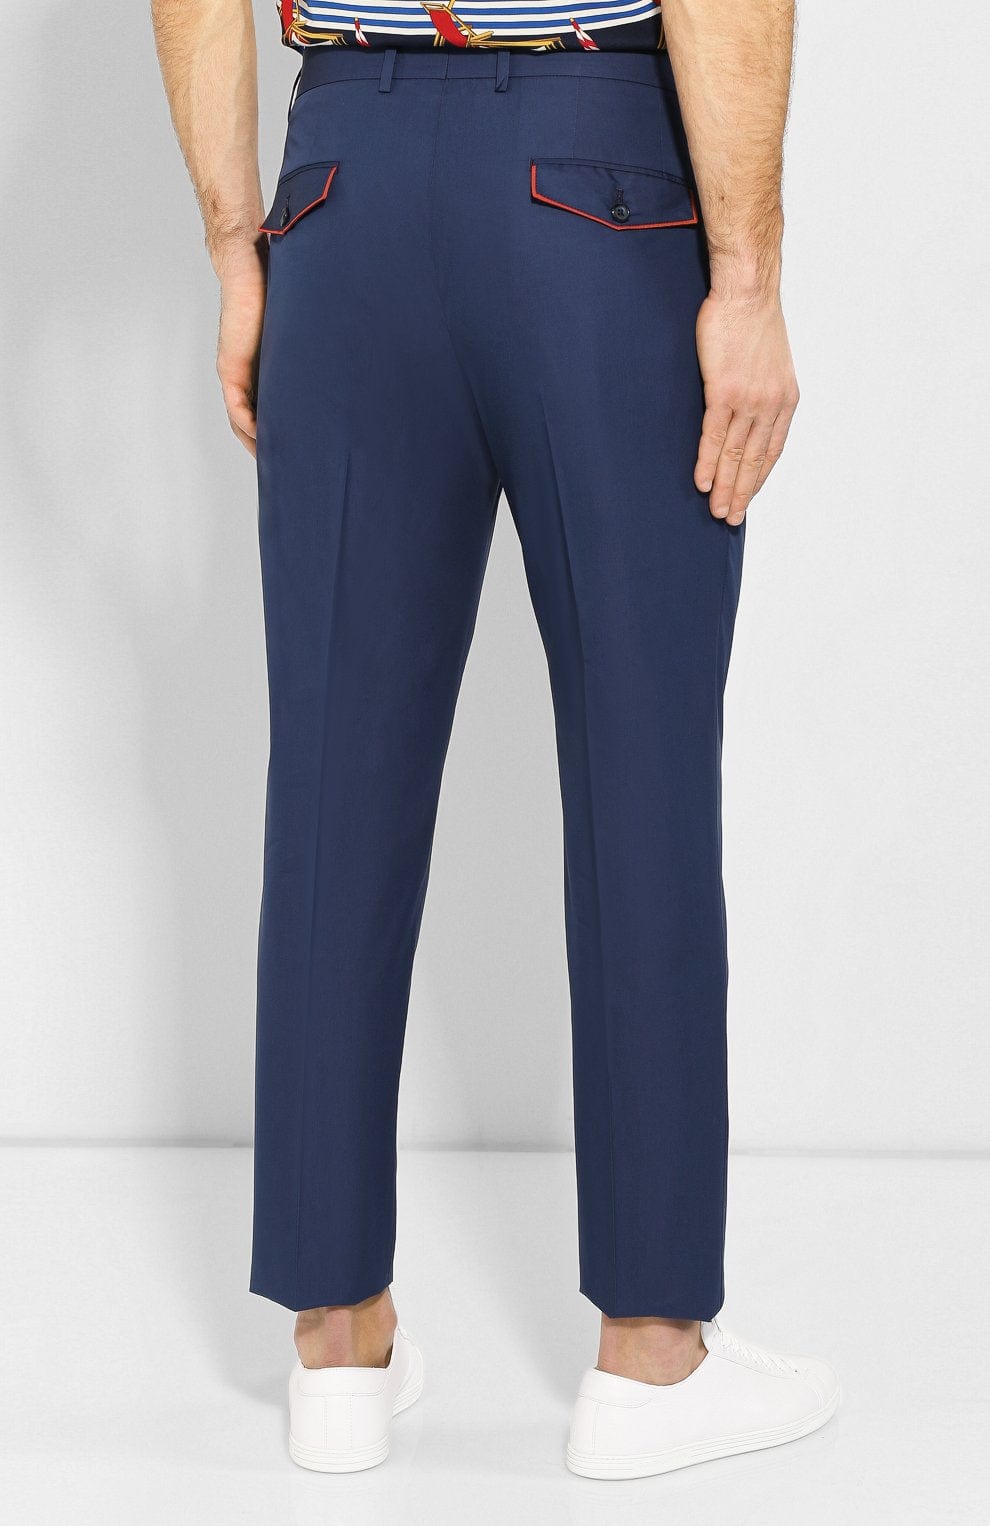 Dolce & Gabbana Slim-Fit Pants With Ruffles